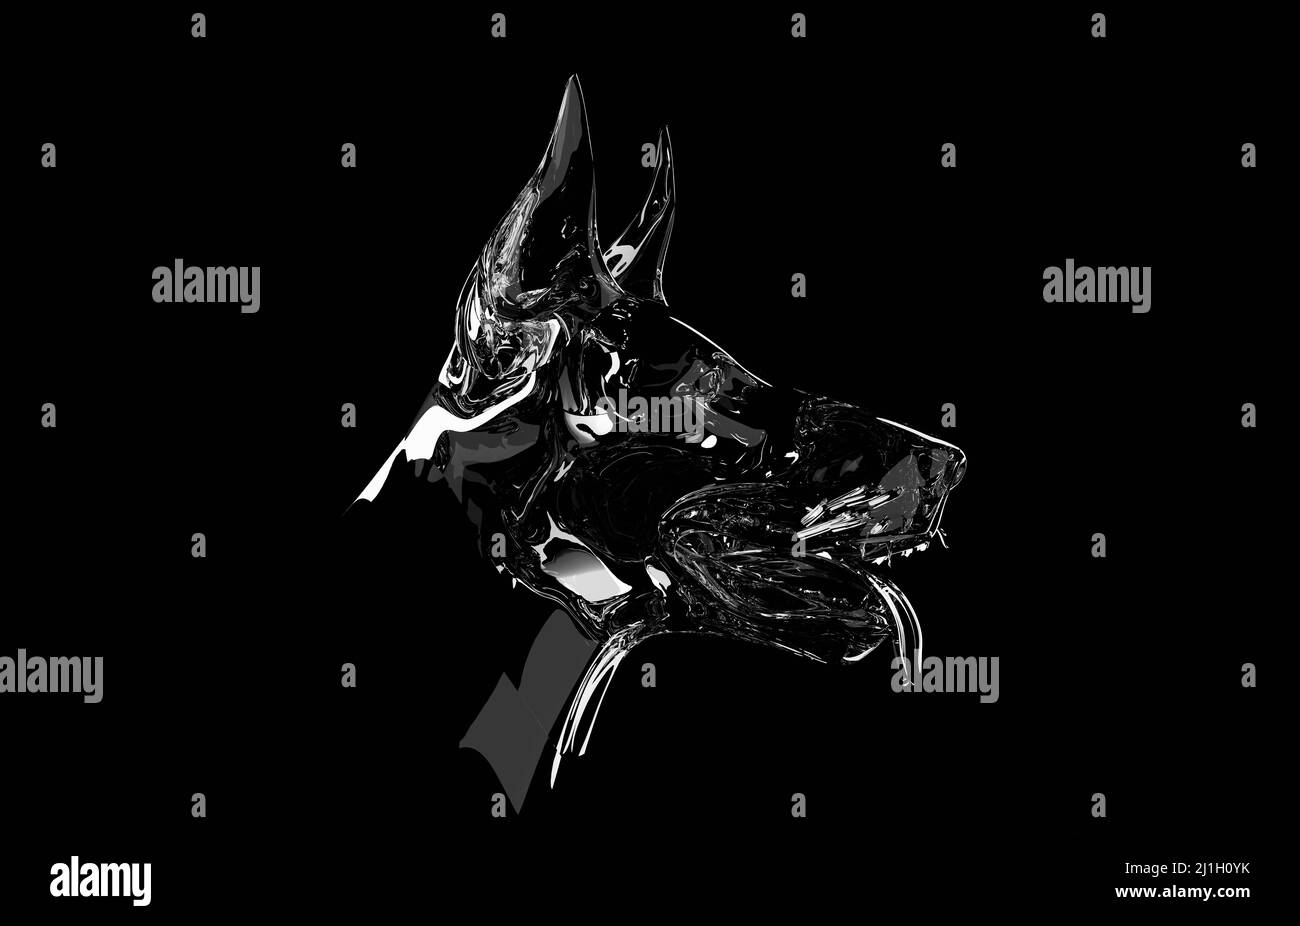 Abstract close up view of Doberman. Pets, dog lovers, animal themed design element isolated on black background.  Mistry style trendy modern design. 3 Stock Photo